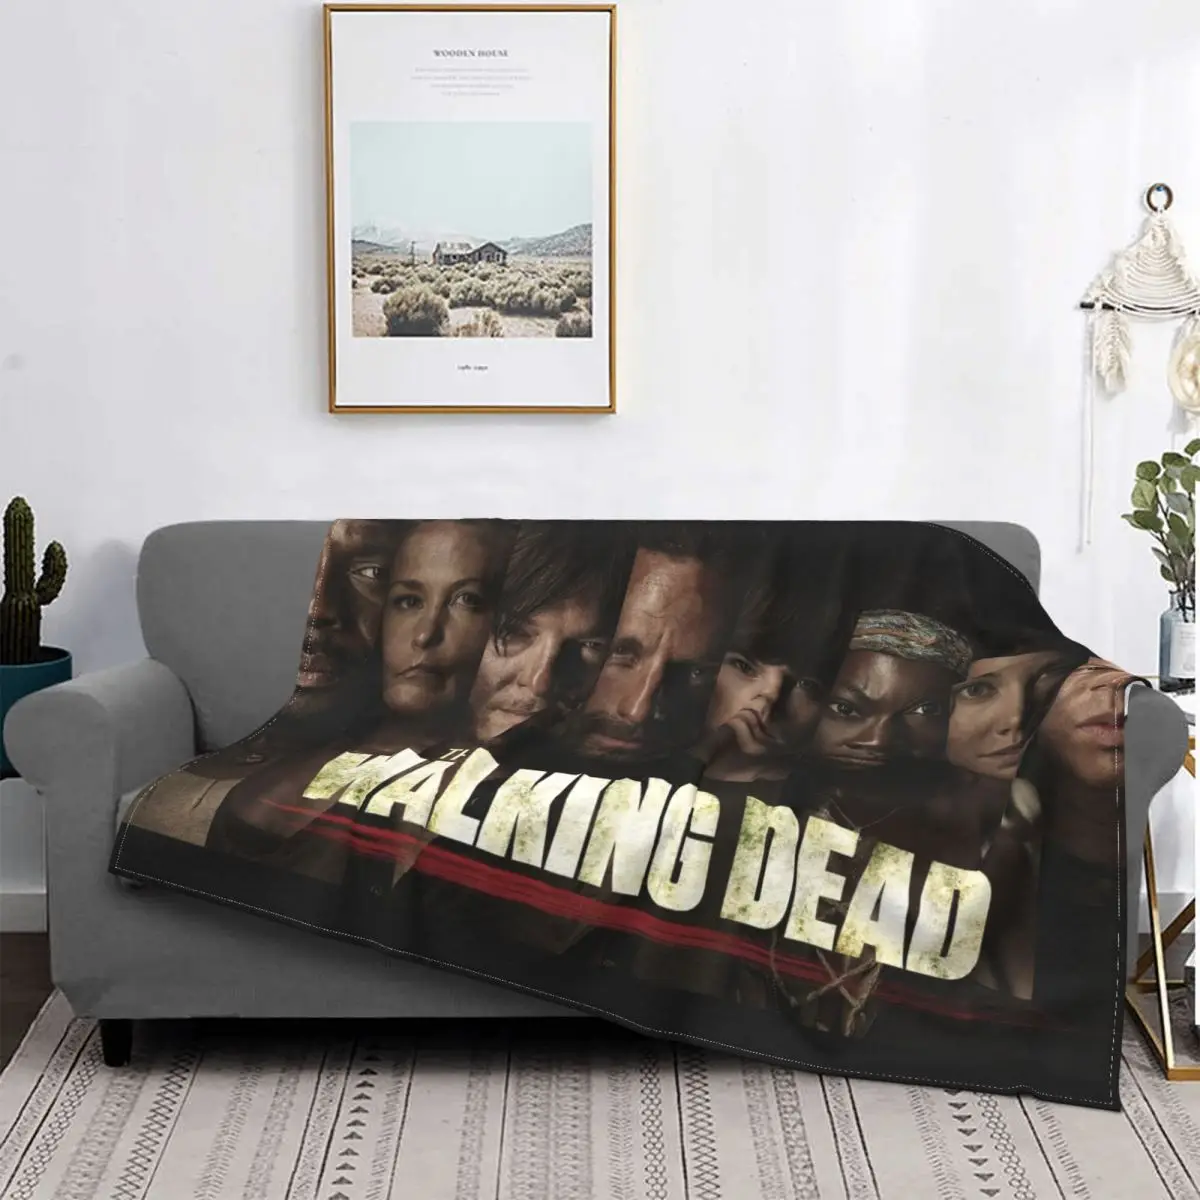 

The Walking Dead Horror Movie Blanket Rick Grimes Daryl Dixon Carl Grimes Comic Flannel Soft Throw Blanket for Coverlet Winter